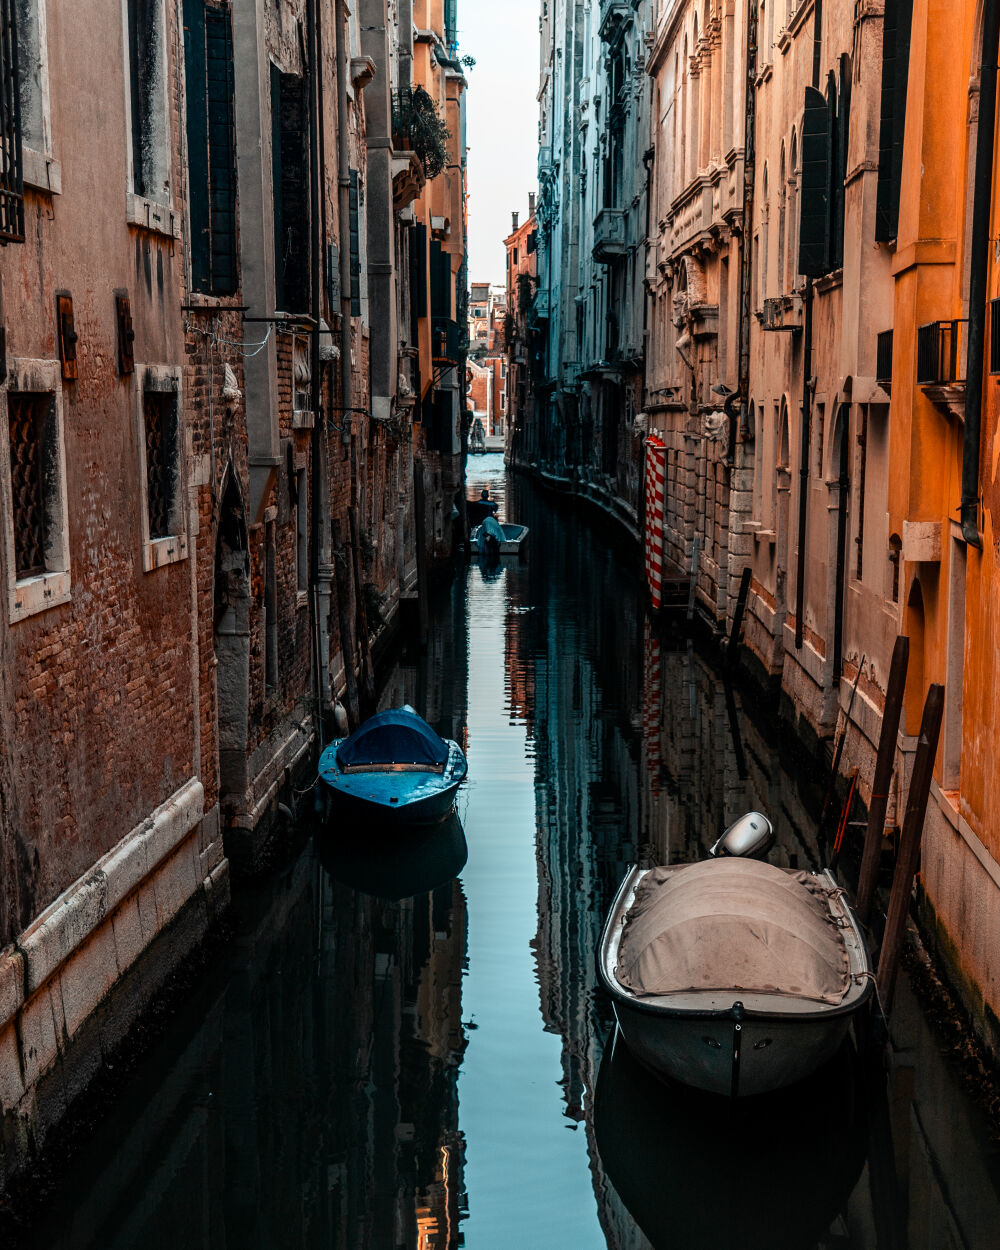 Natural alleys in Venice